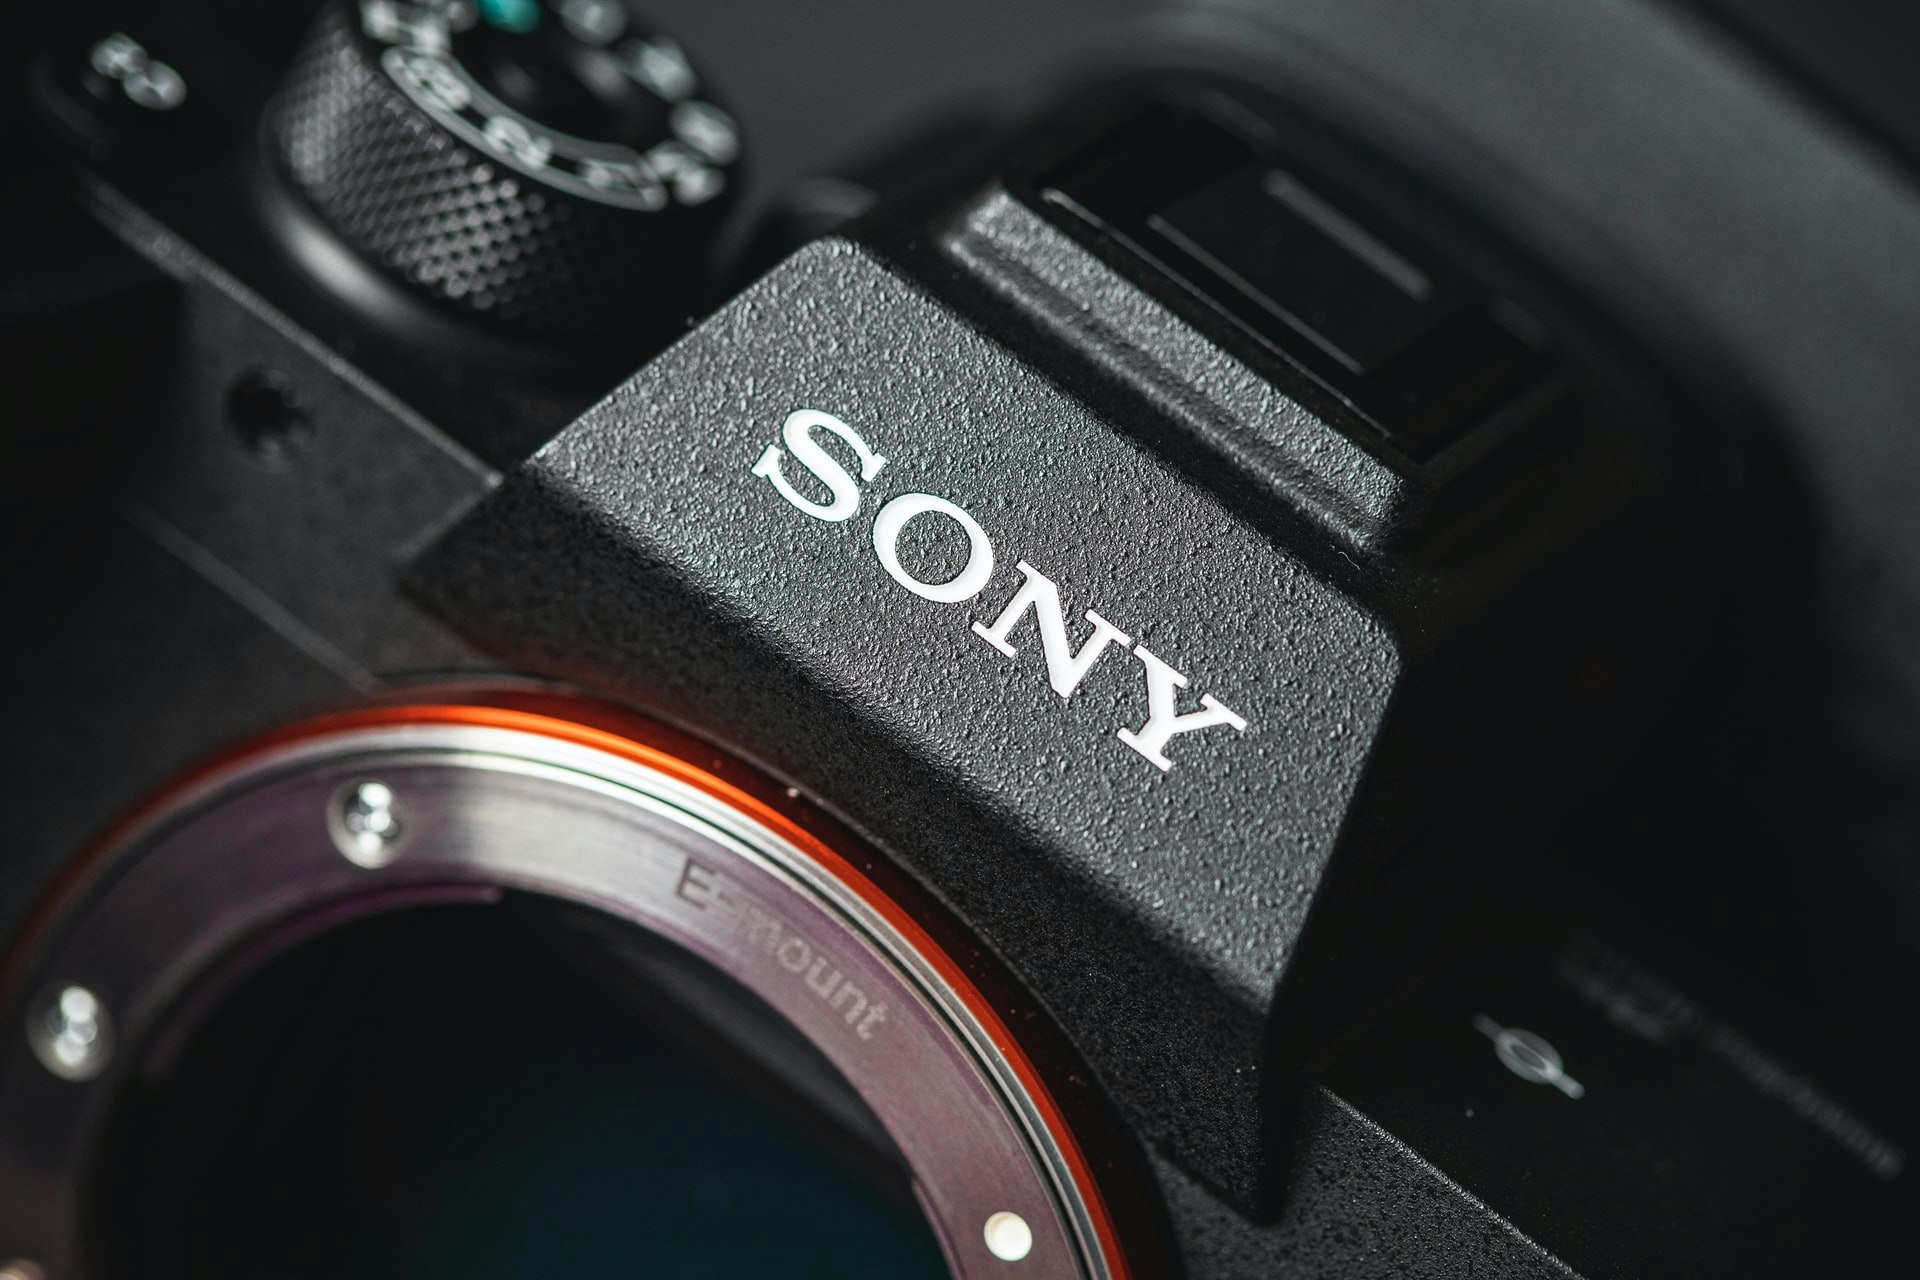 Buy Sony a6400 Mirrorless Camera in Black with 16-50mm Lens - Jessops